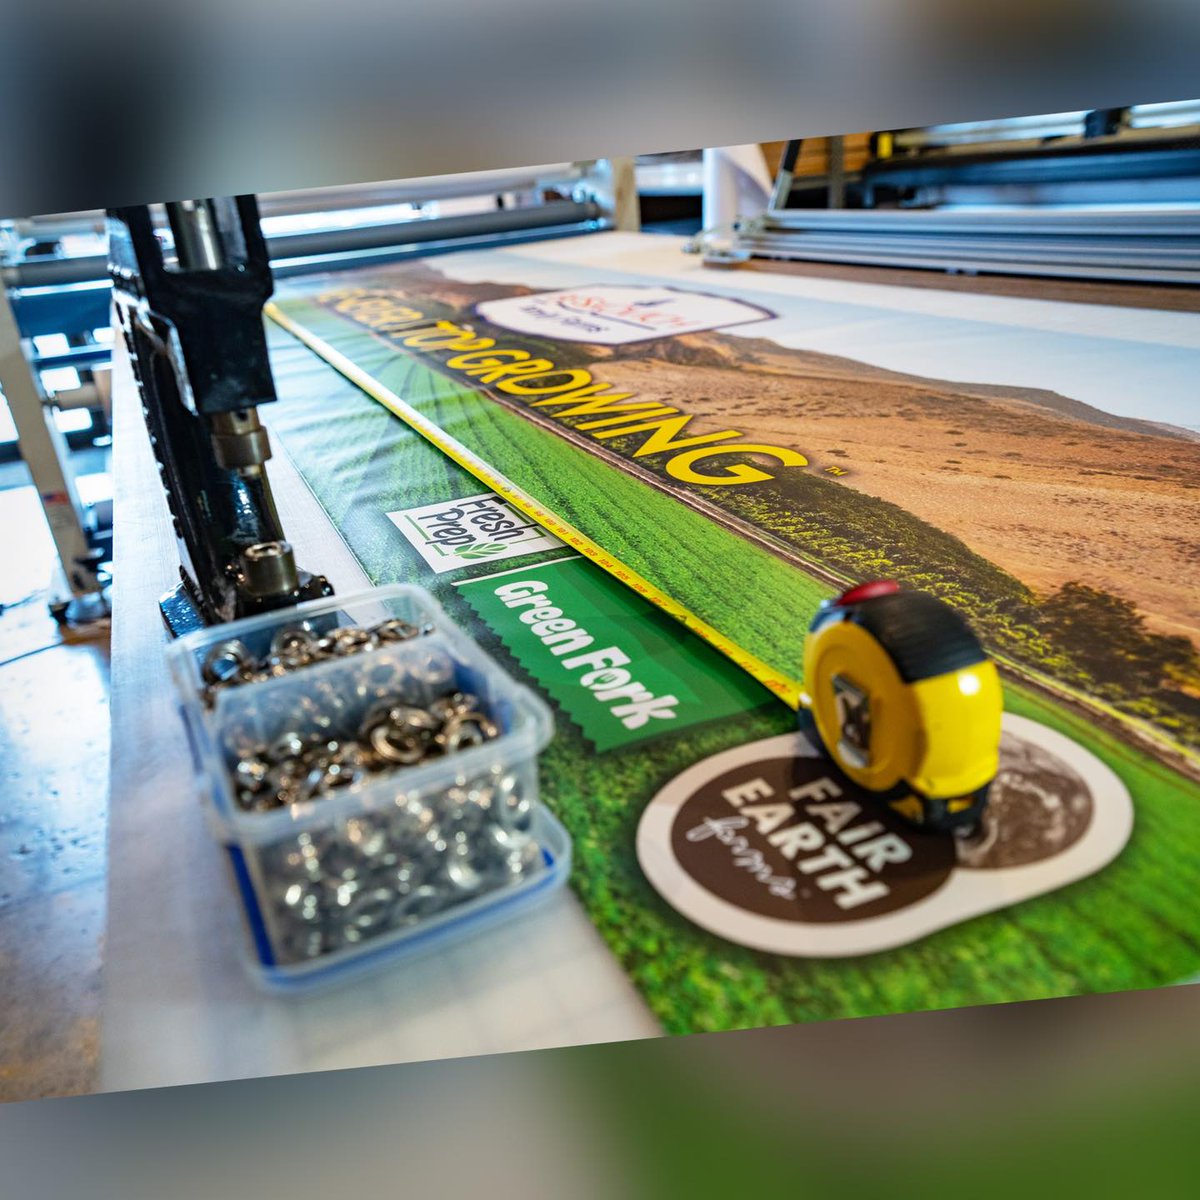 A behind-the-scenes view of some of what we do here at Candu… banners! 😃 We recently printed this banner for Boskovich Farms Inc. If you need a banner for your upcoming event, Candu can do! 👍
.
.
.
#ThousandOaks #WestlakeVillage #SimiValley